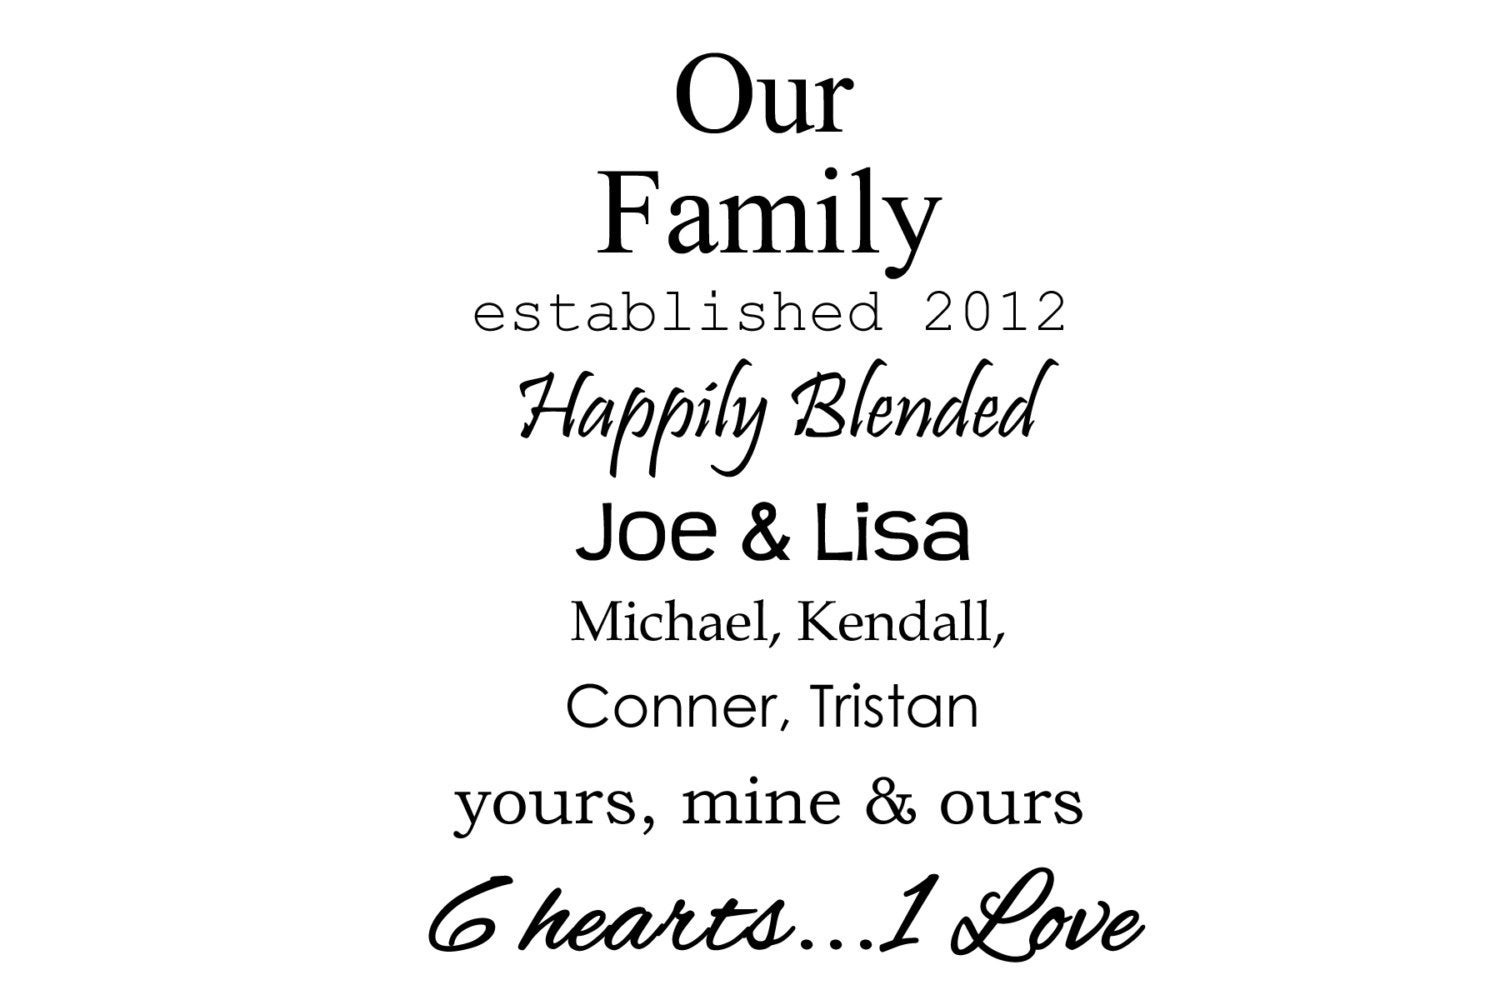 Blended Family Wedding Quotes
 Our Family Happily Blended Vinyl Wall Quote